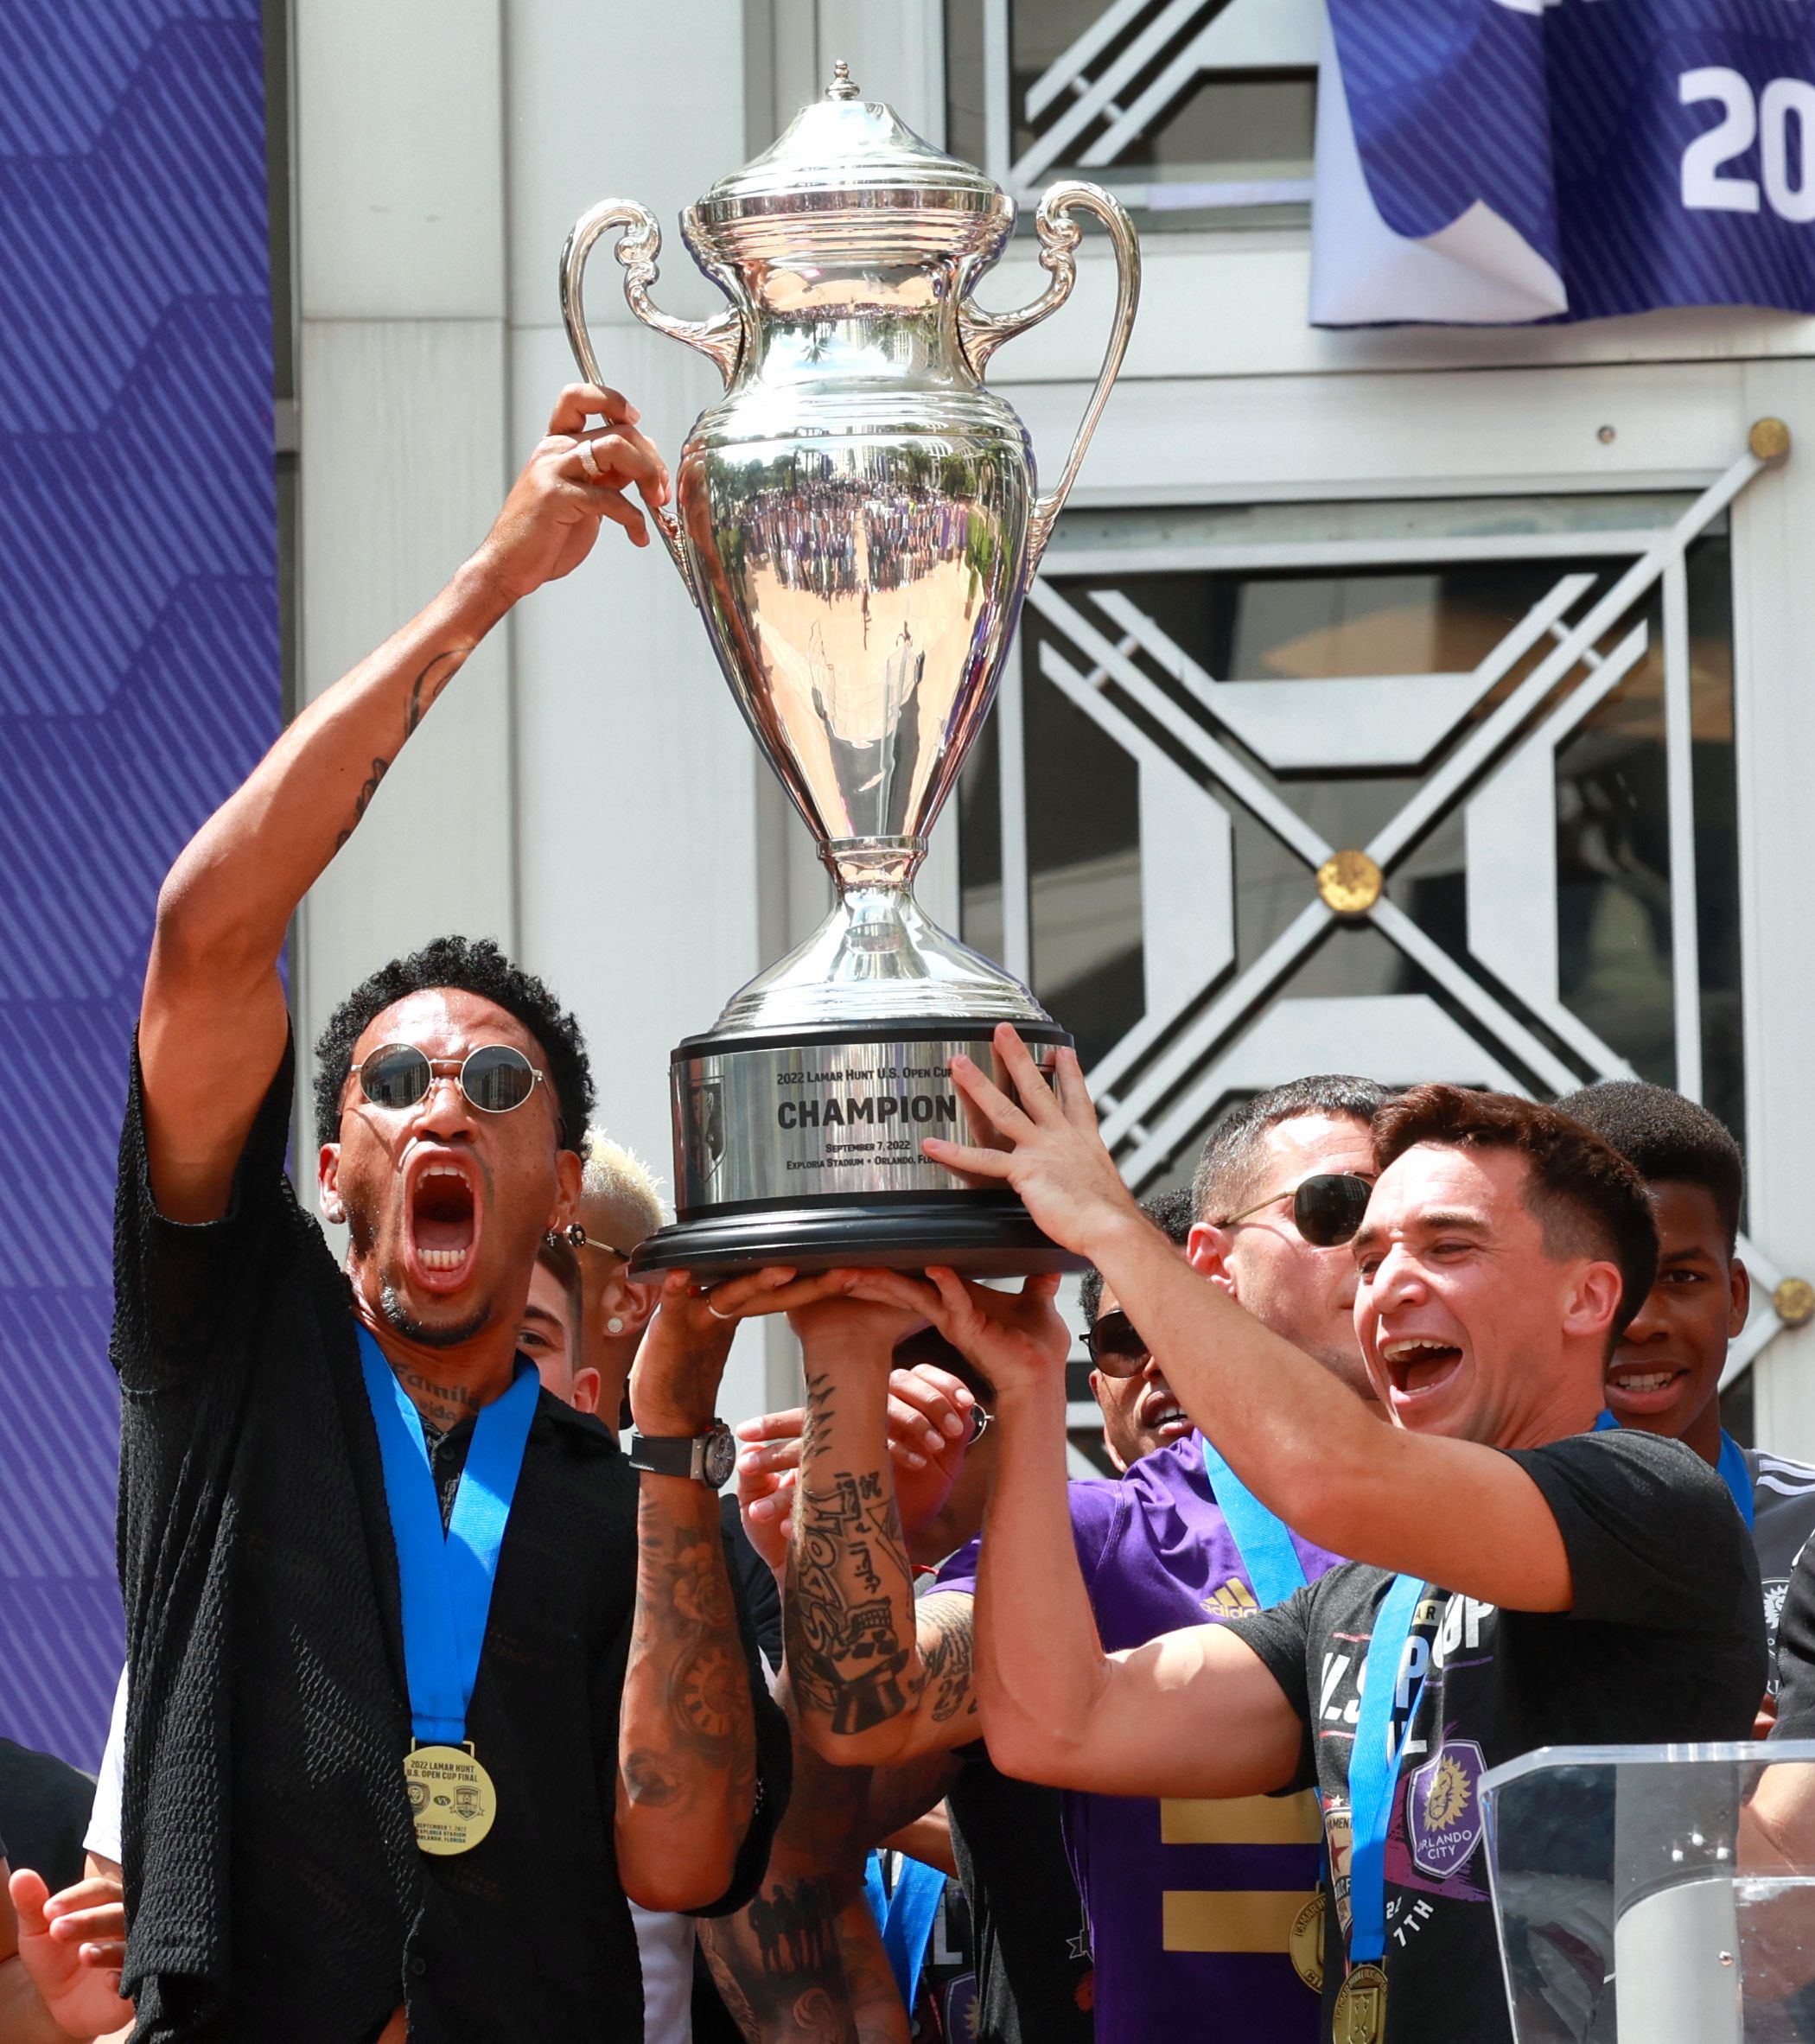 US Open Cup champions! Orlando City achieve history, beat